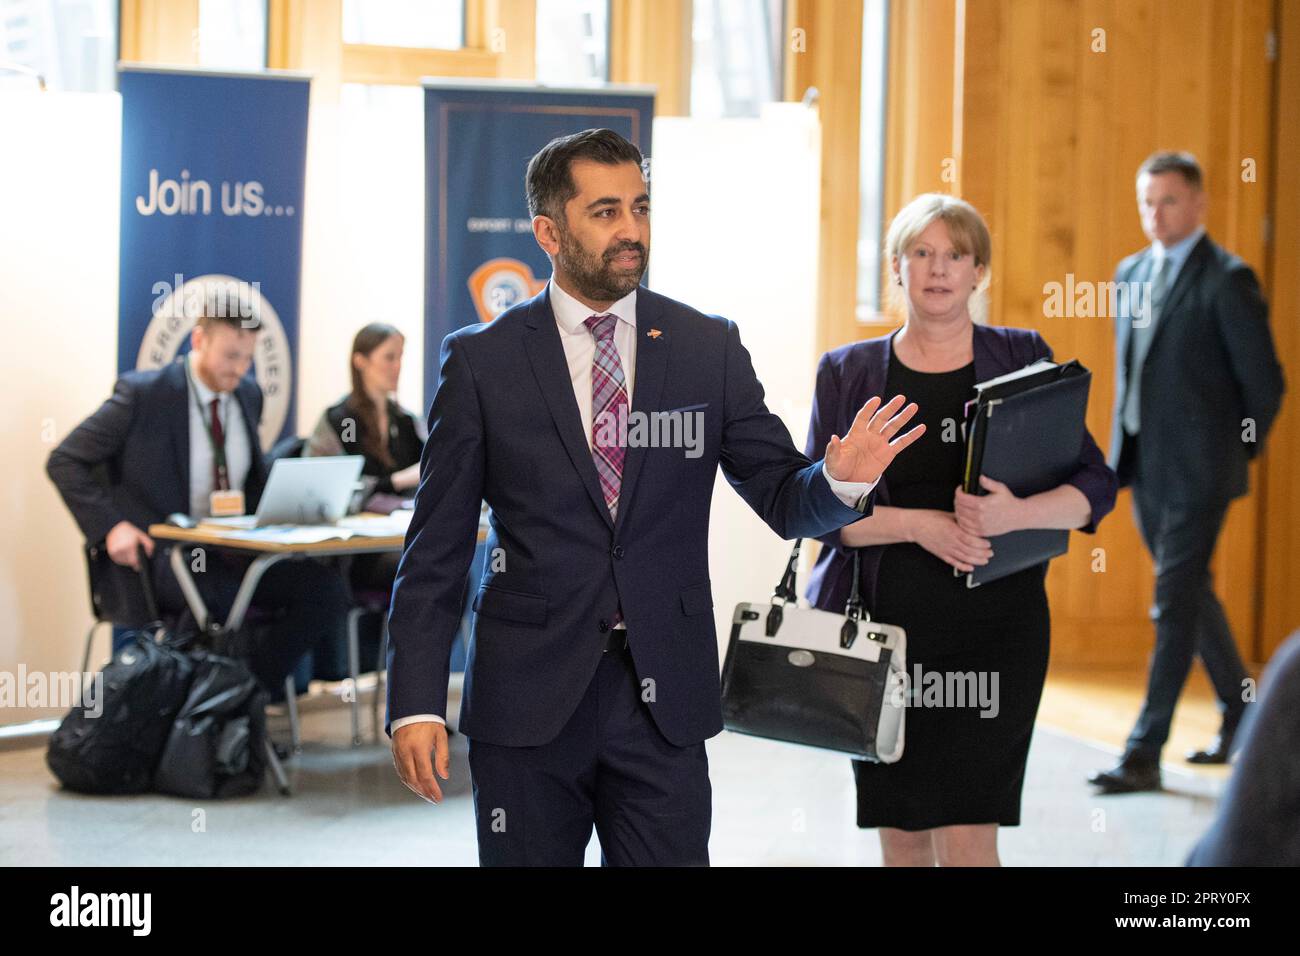 Edinburgh, Scotland, UK. 27th Apr, 2023. PICTURED: Humza Yousaf MSP, First Minister of Scotland and Leader of the Scottish National Party (SNP), seen being questioned by awaiting media and journalists immediately after FMQs session has finished. Weekly session of First Ministers Questions as Humza Yousaf MSP, First Minister of Scotland takes questions in the chamber. Scenes also inside the corridor before and after FMQs. Credit: Colin Fisher/Alamy Live News Stock Photo